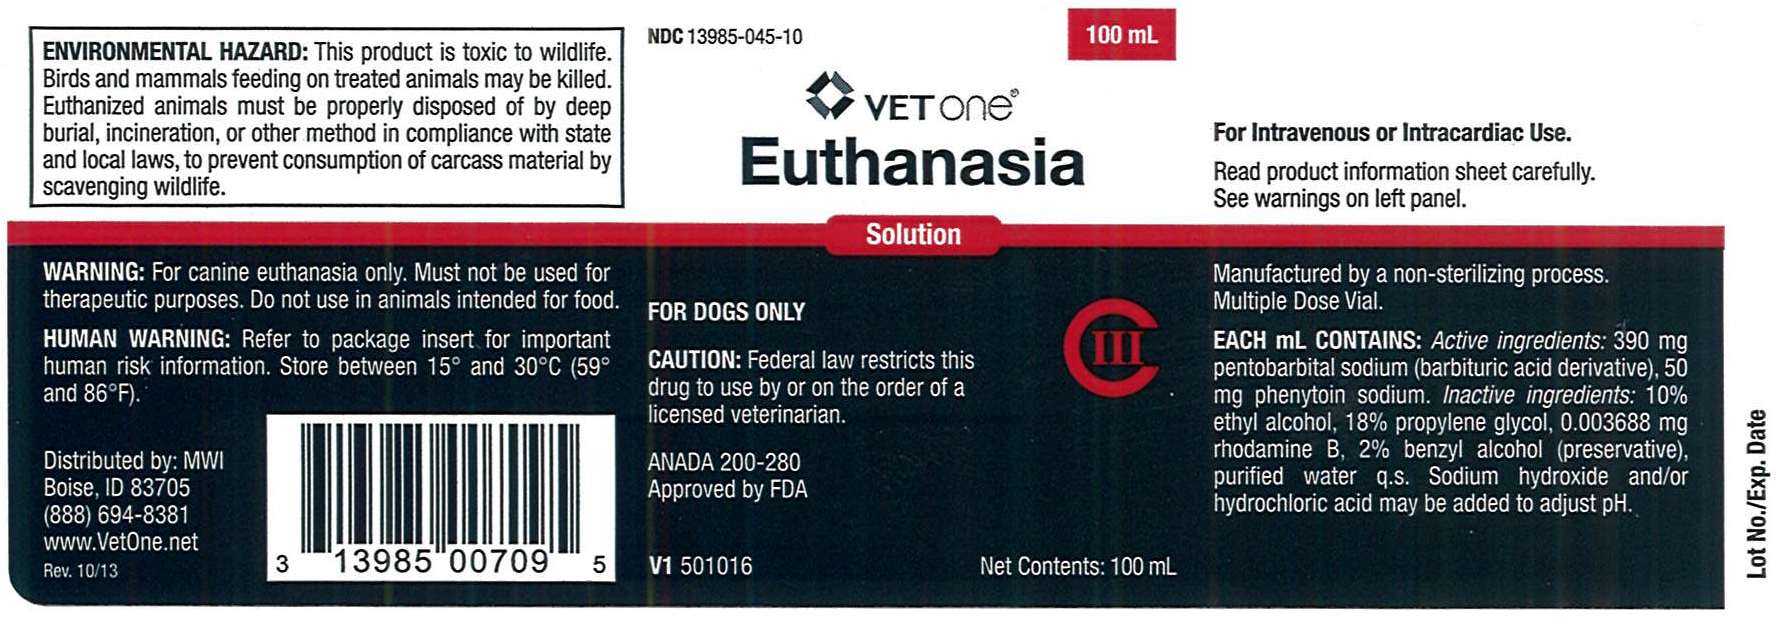 what drug do vets use to euthanasia dogs